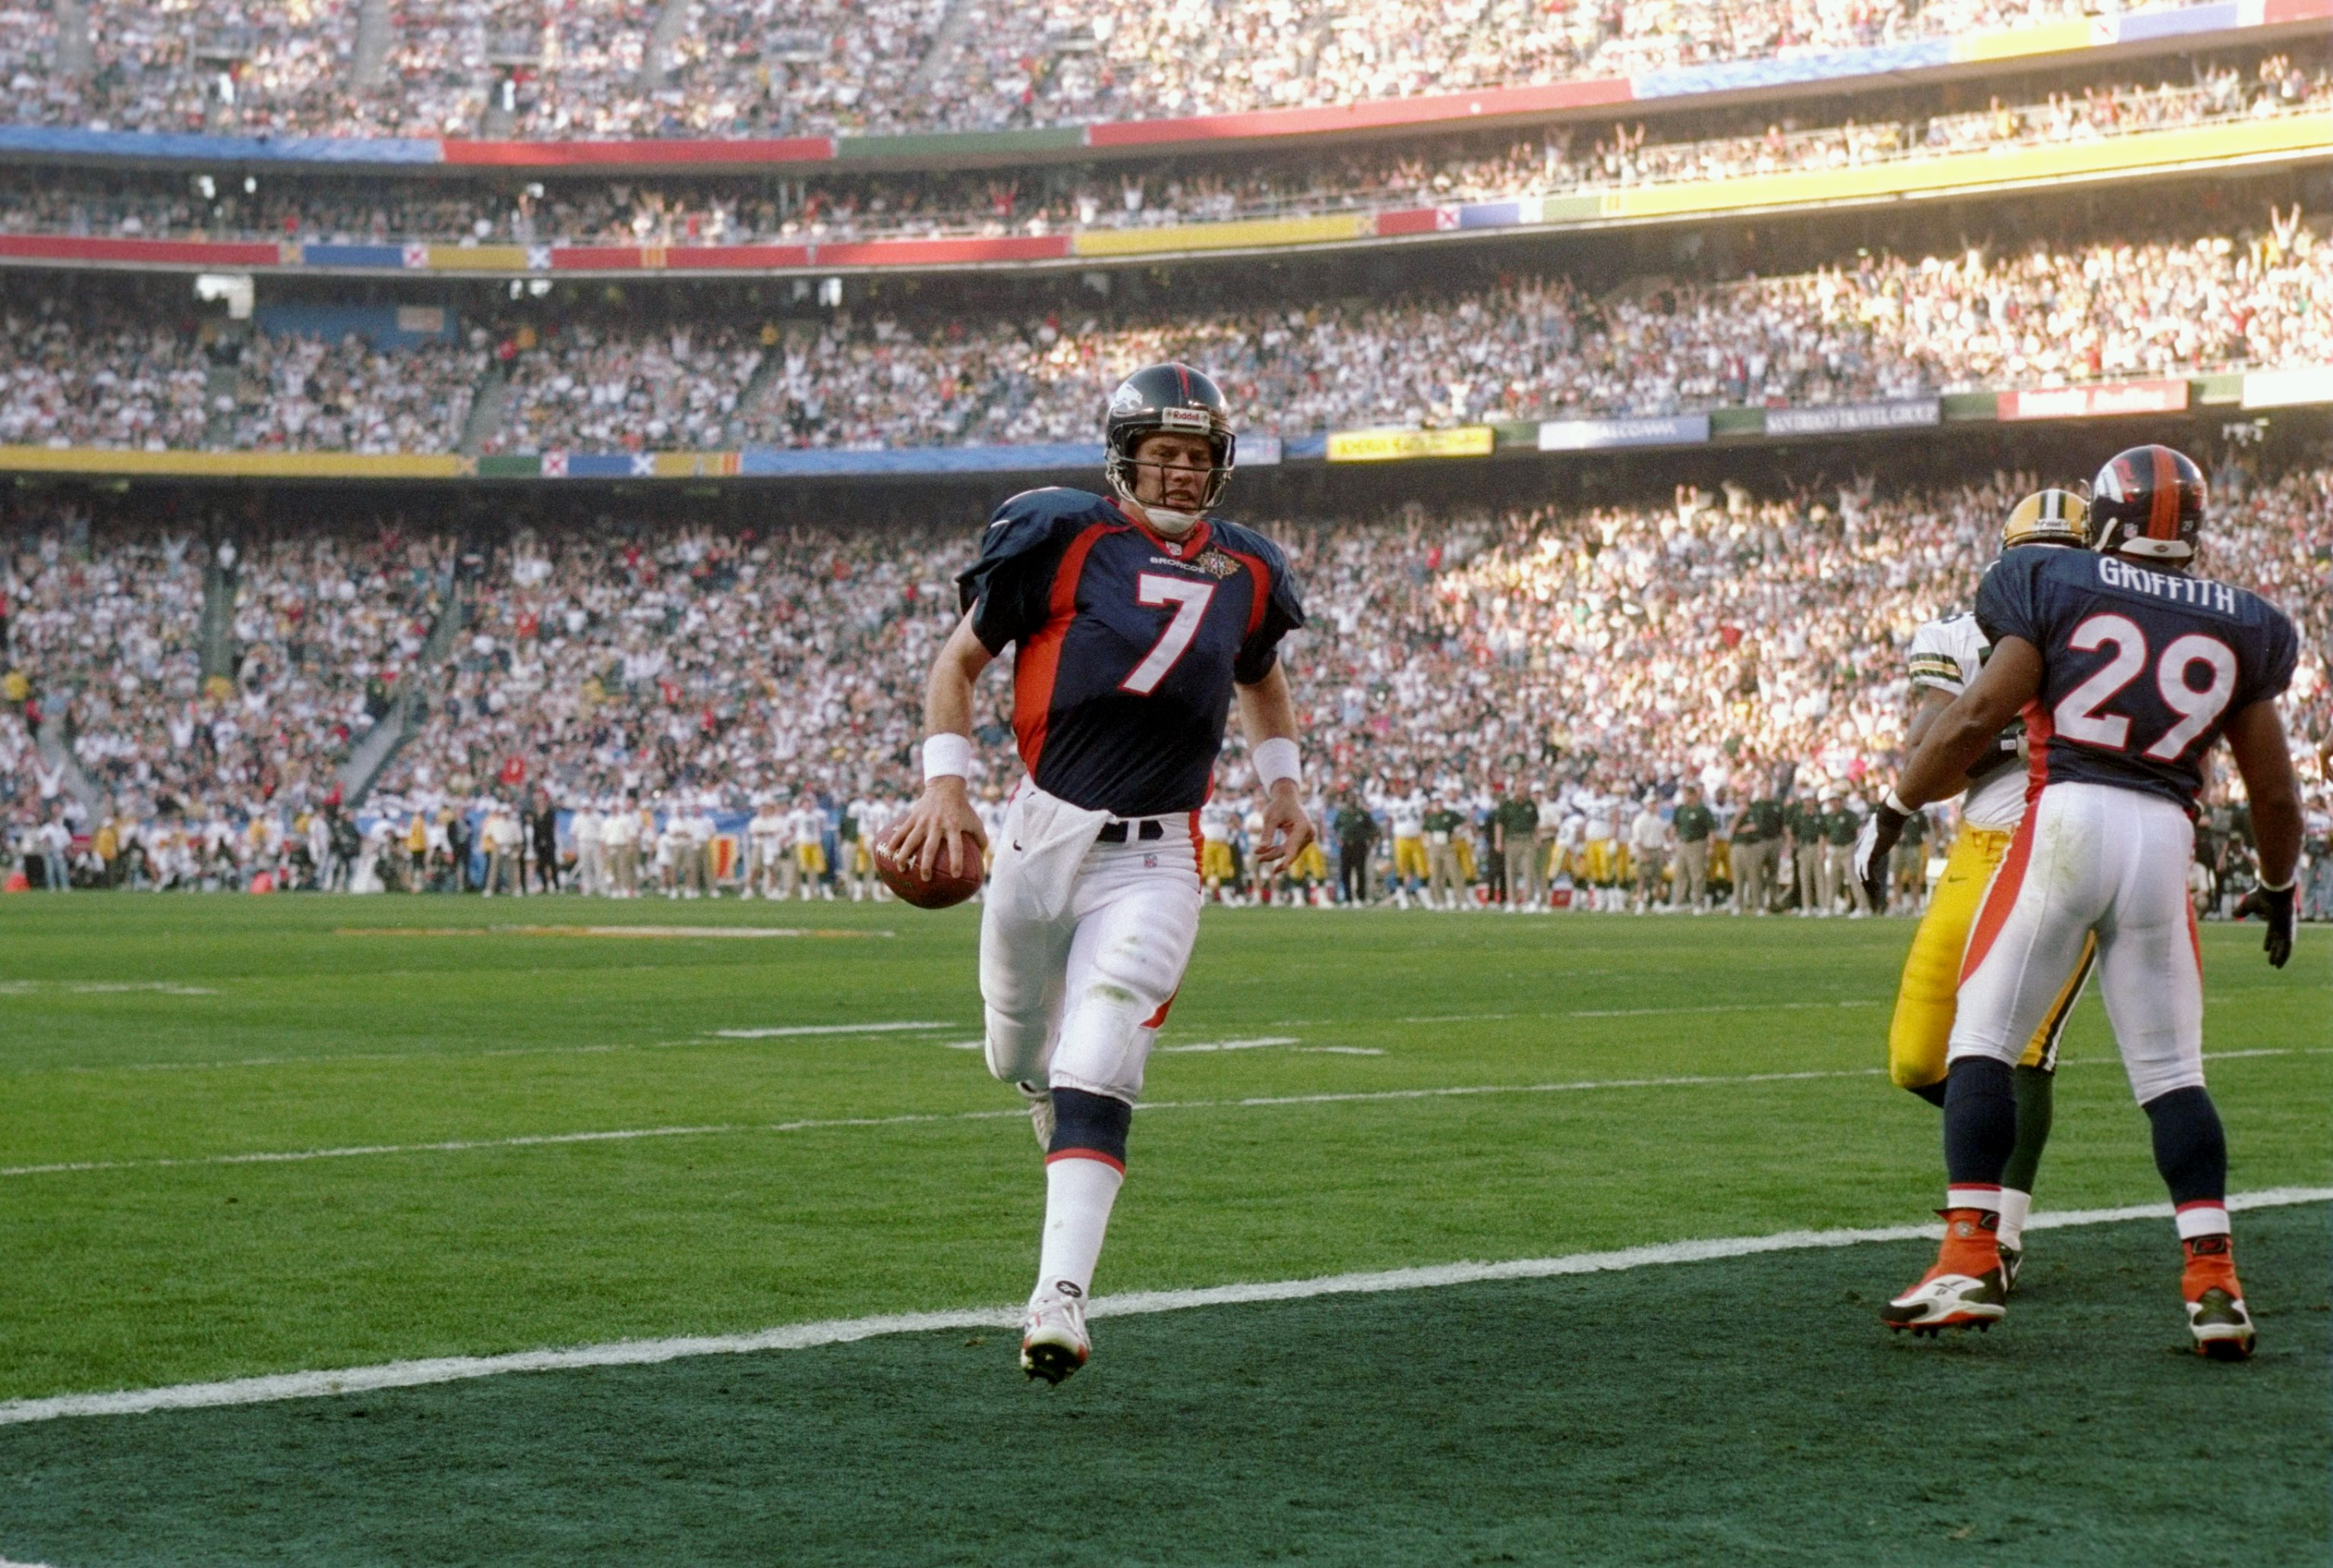 John Elway's slate wiped clean after winning 'The One' Super Bowl in 1998 –  The Denver Post